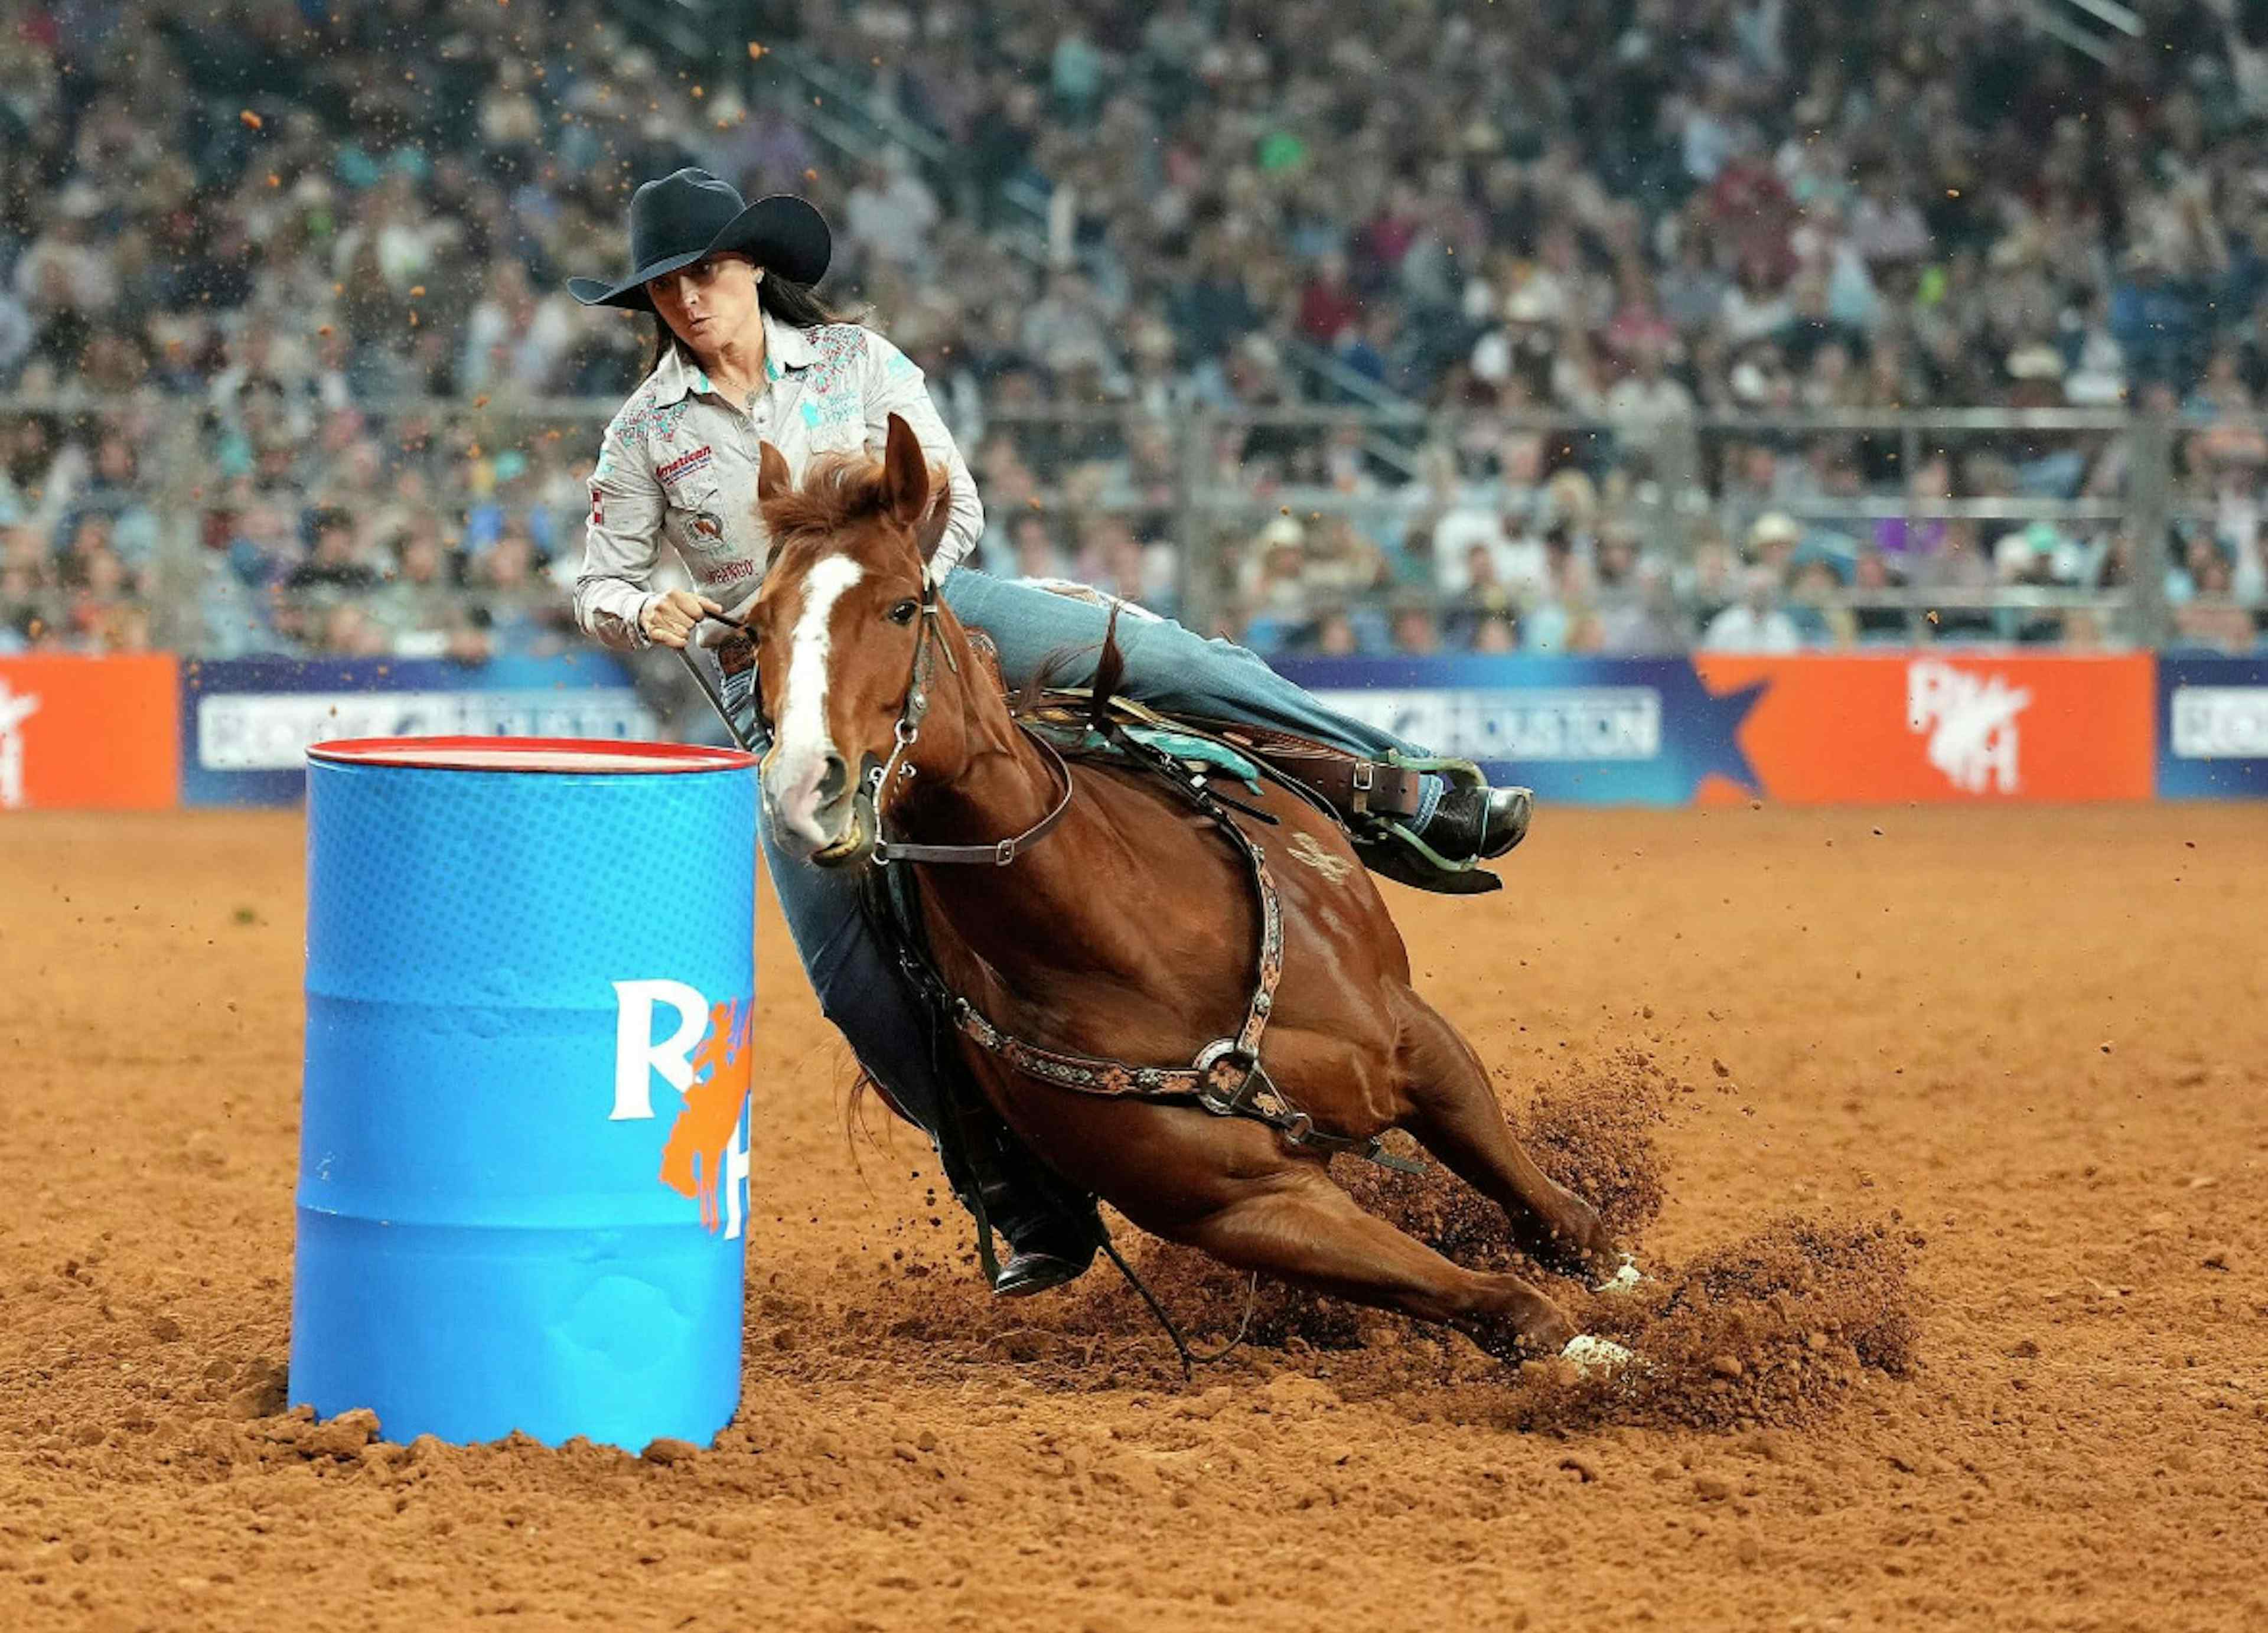 Woman riding a horse around a barrel at the rodeo